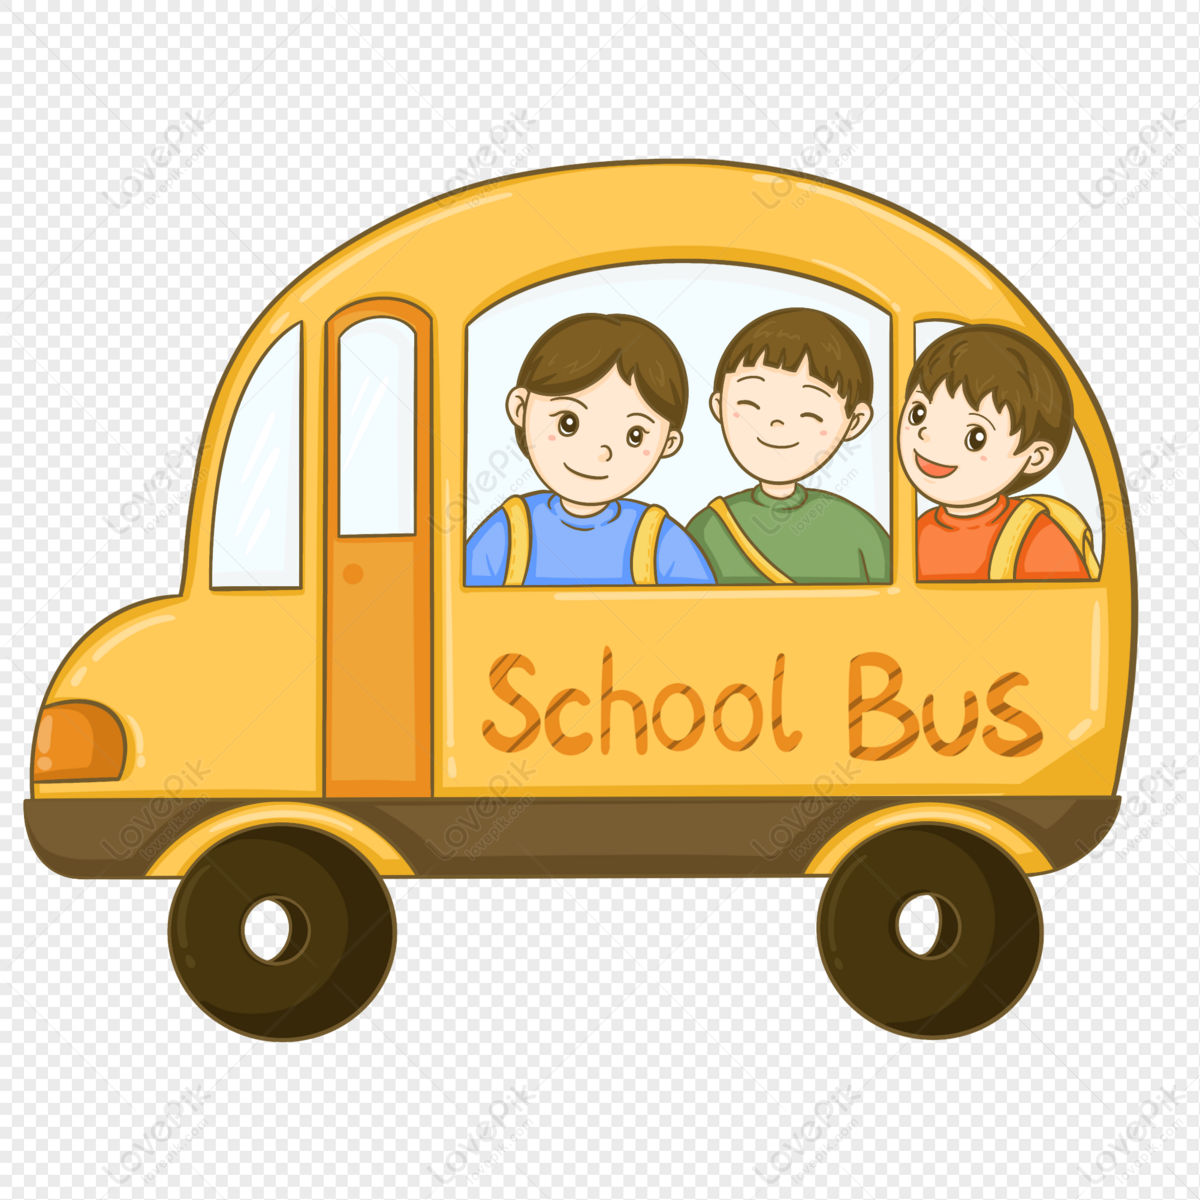 School Bus PNG Free Download And Clipart Image For Free Download - Lovepik  | 401504263